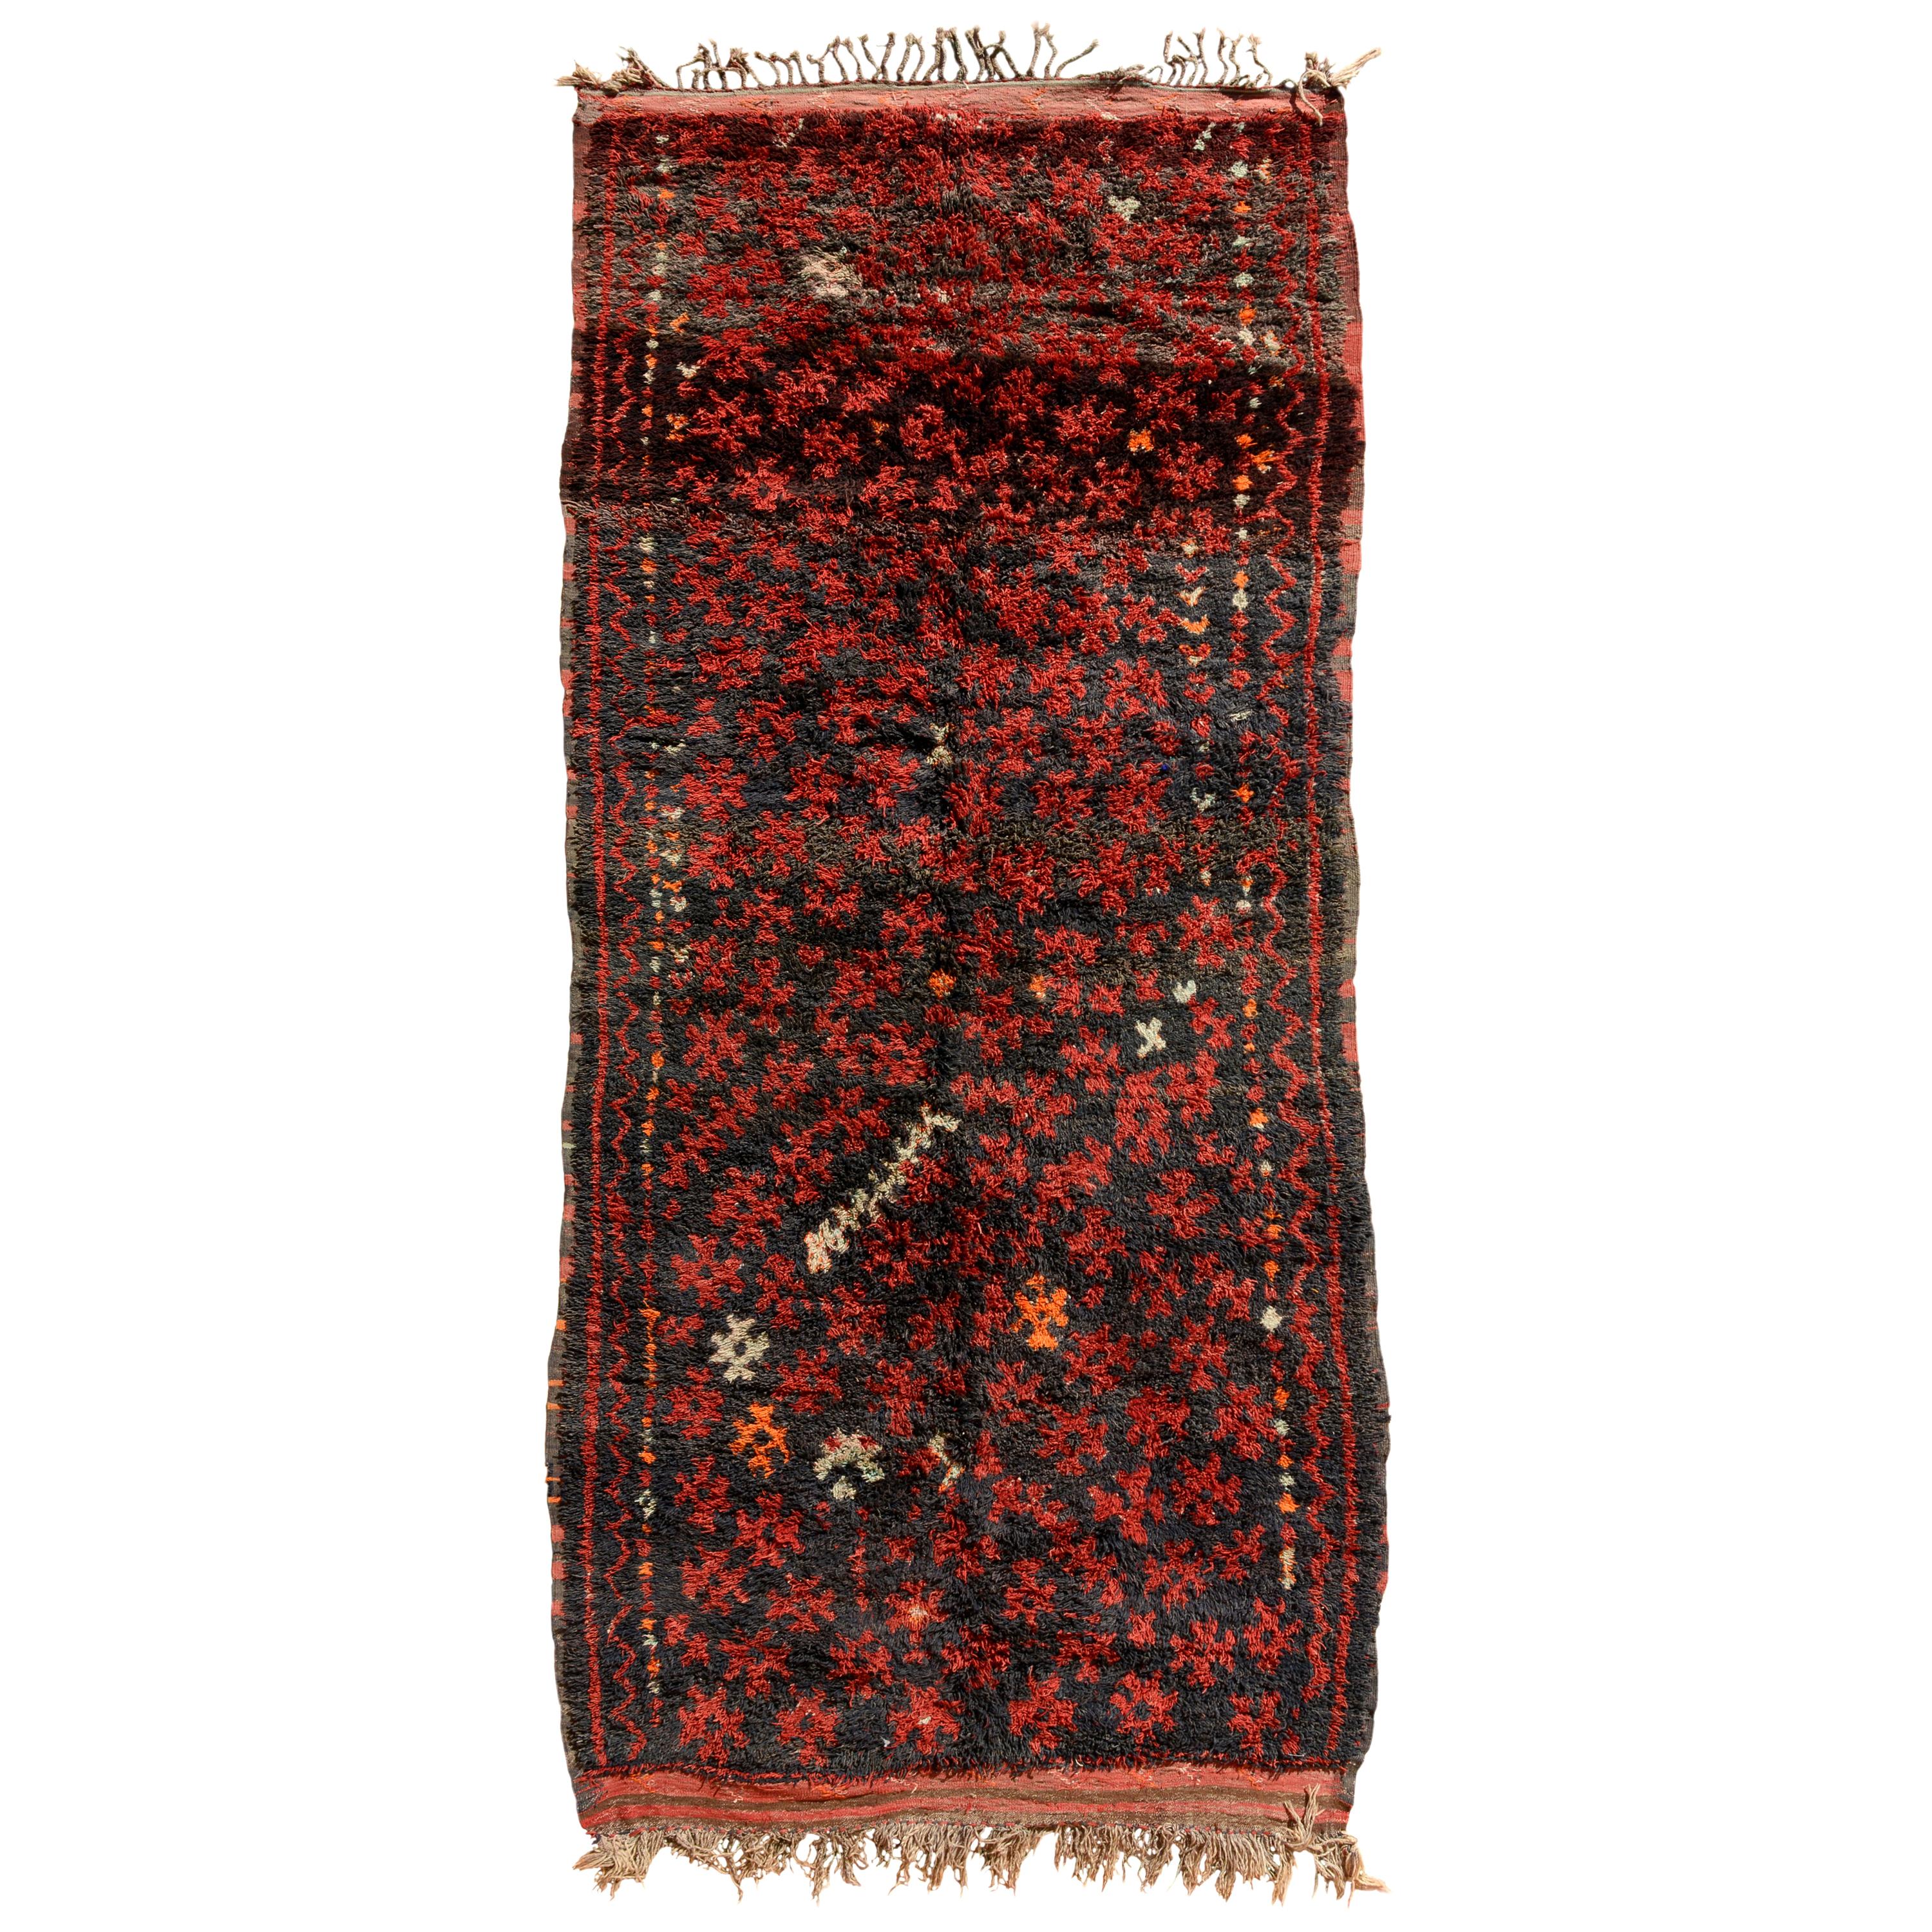 Vintage Moroccan or Algerian Berber Rug from the Middle of the 20th Century For Sale